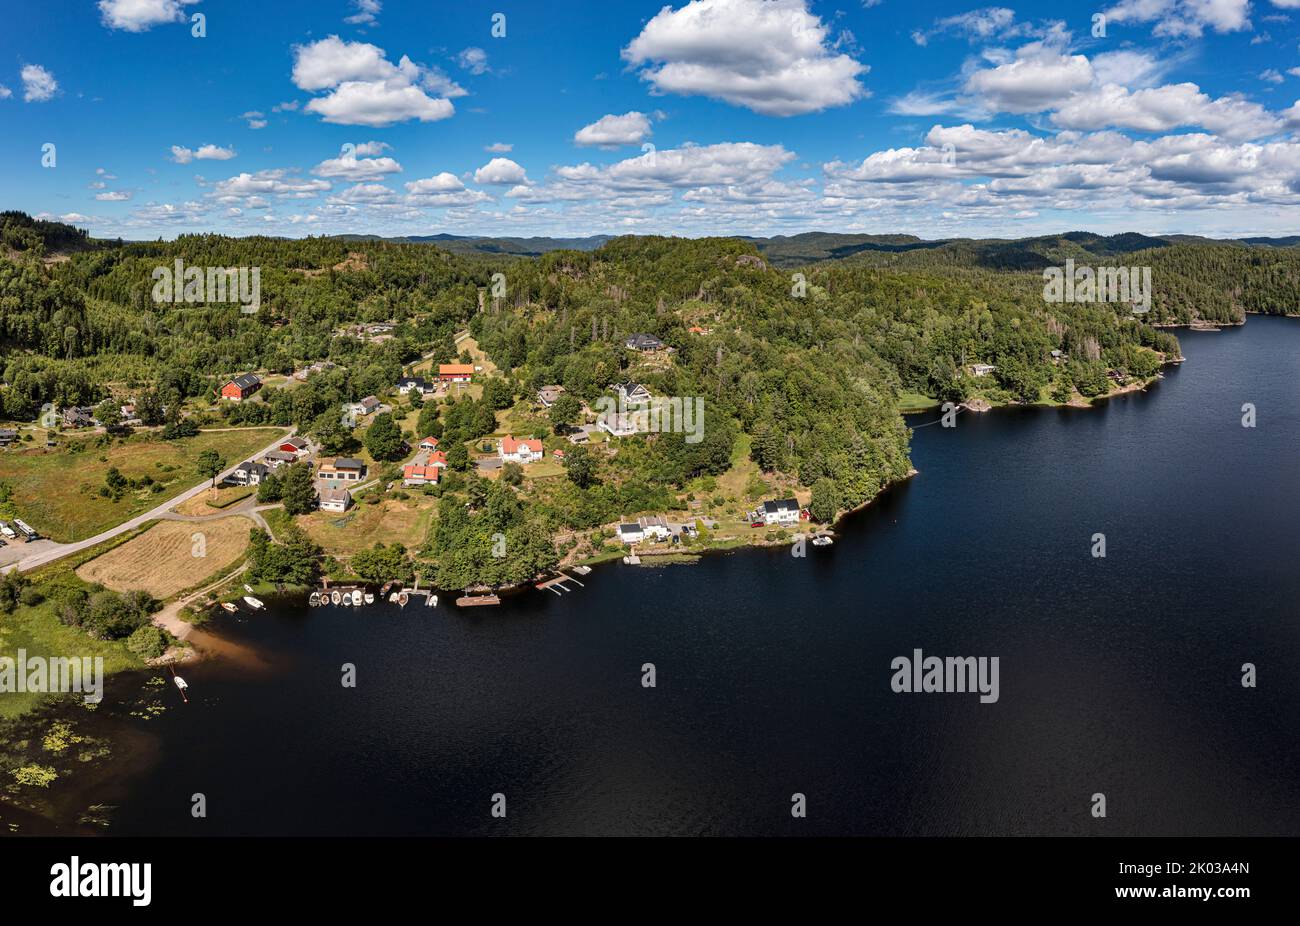 Norway, Vestfold og Telemark, Larvik, Kjose, Farris, lake, forest, mountains, occasional houses, overview, aerial view Stock Photo